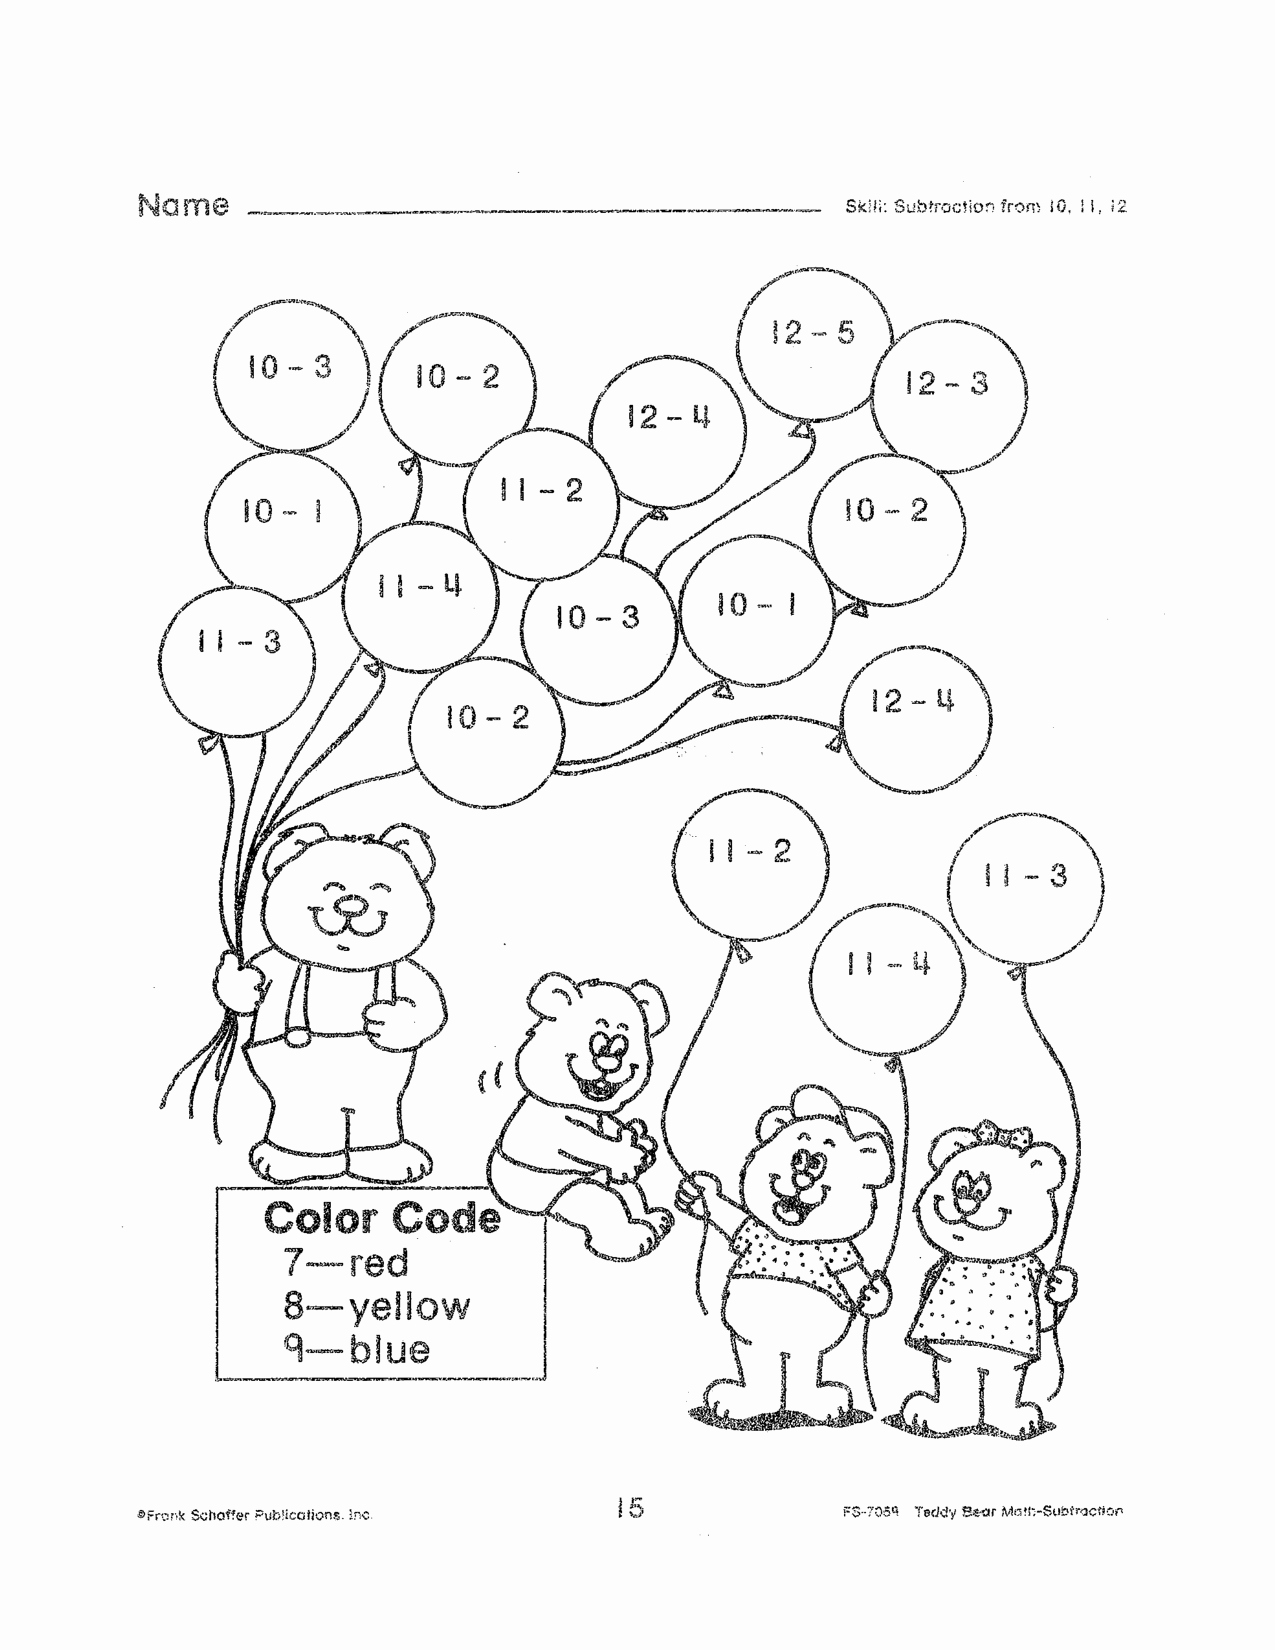 Summary Worksheets 2nd Grade Luxury Free Printable Second Grade Worksheets